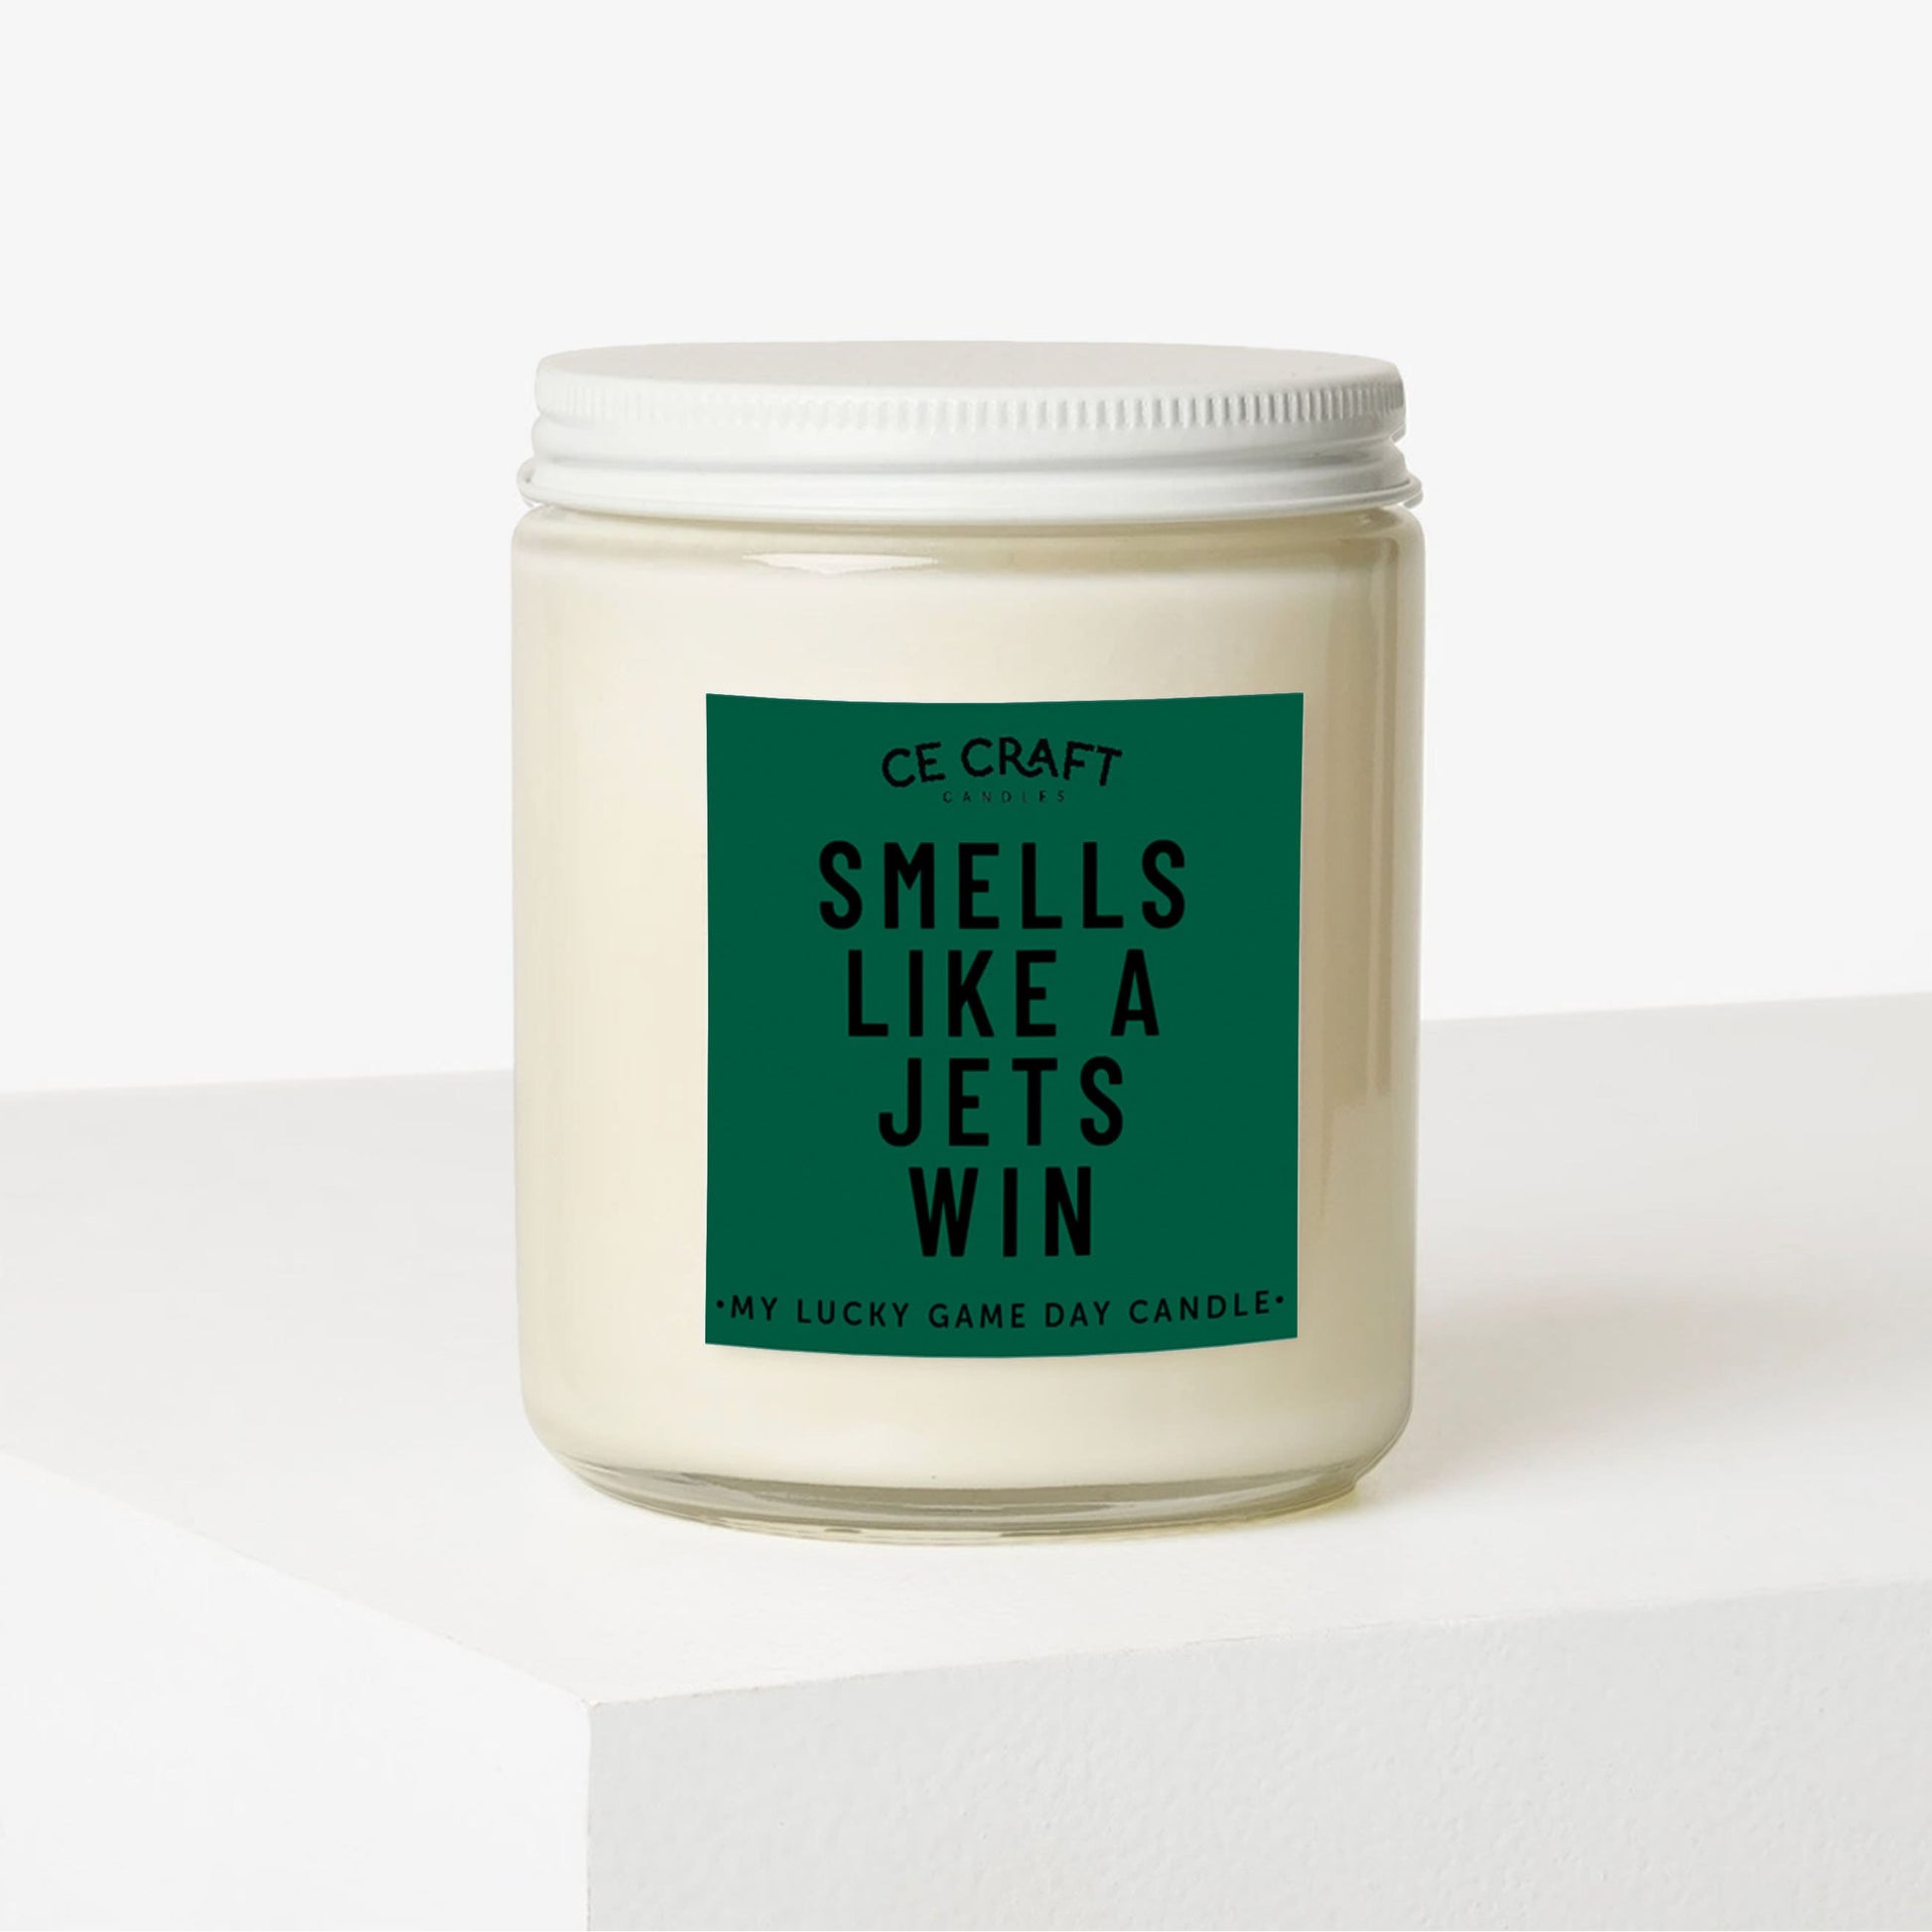 Smells Like a Jets Win Scented Candle C & E Craft Co 